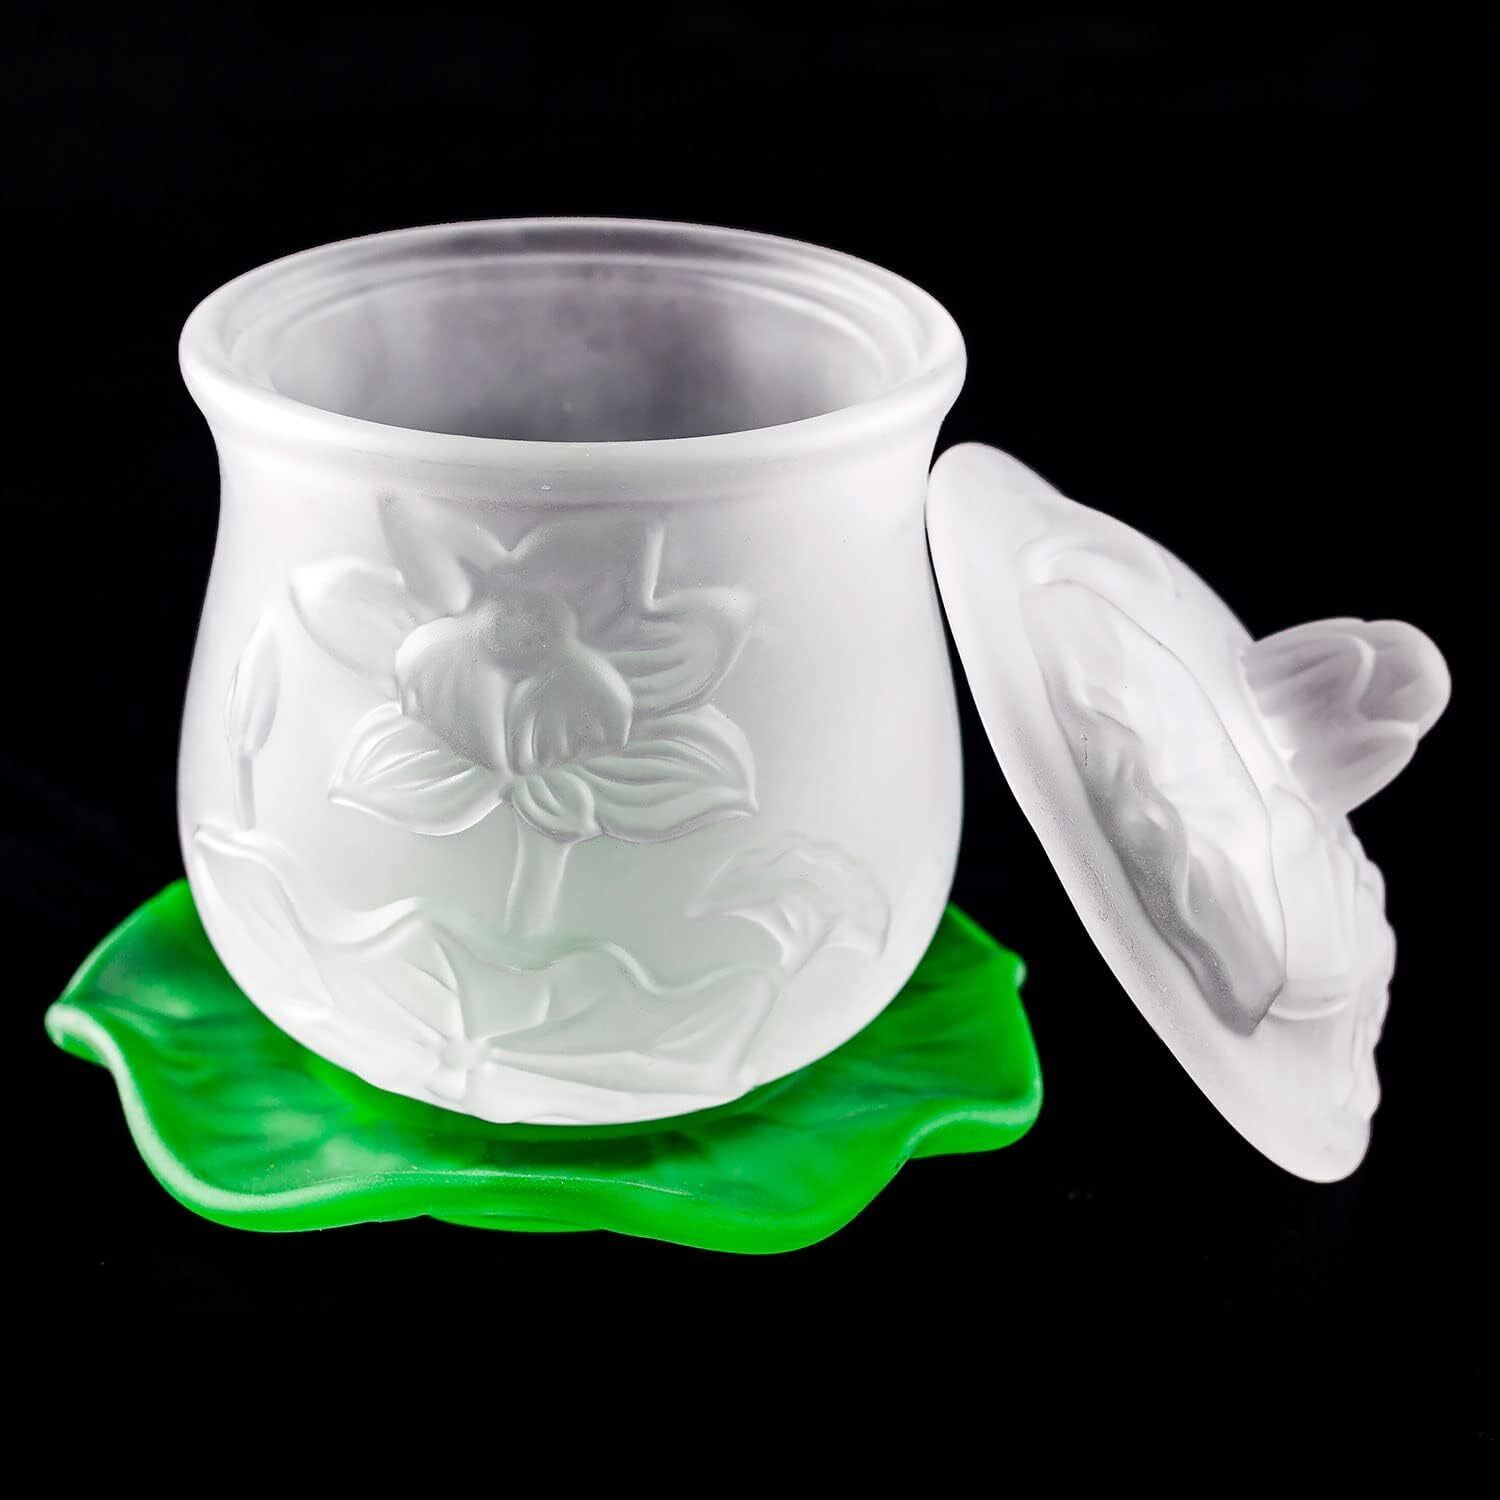 1pc White Glass Altar Cup Buddha Water Cup Offering Cup Altar Buddhist Supplies